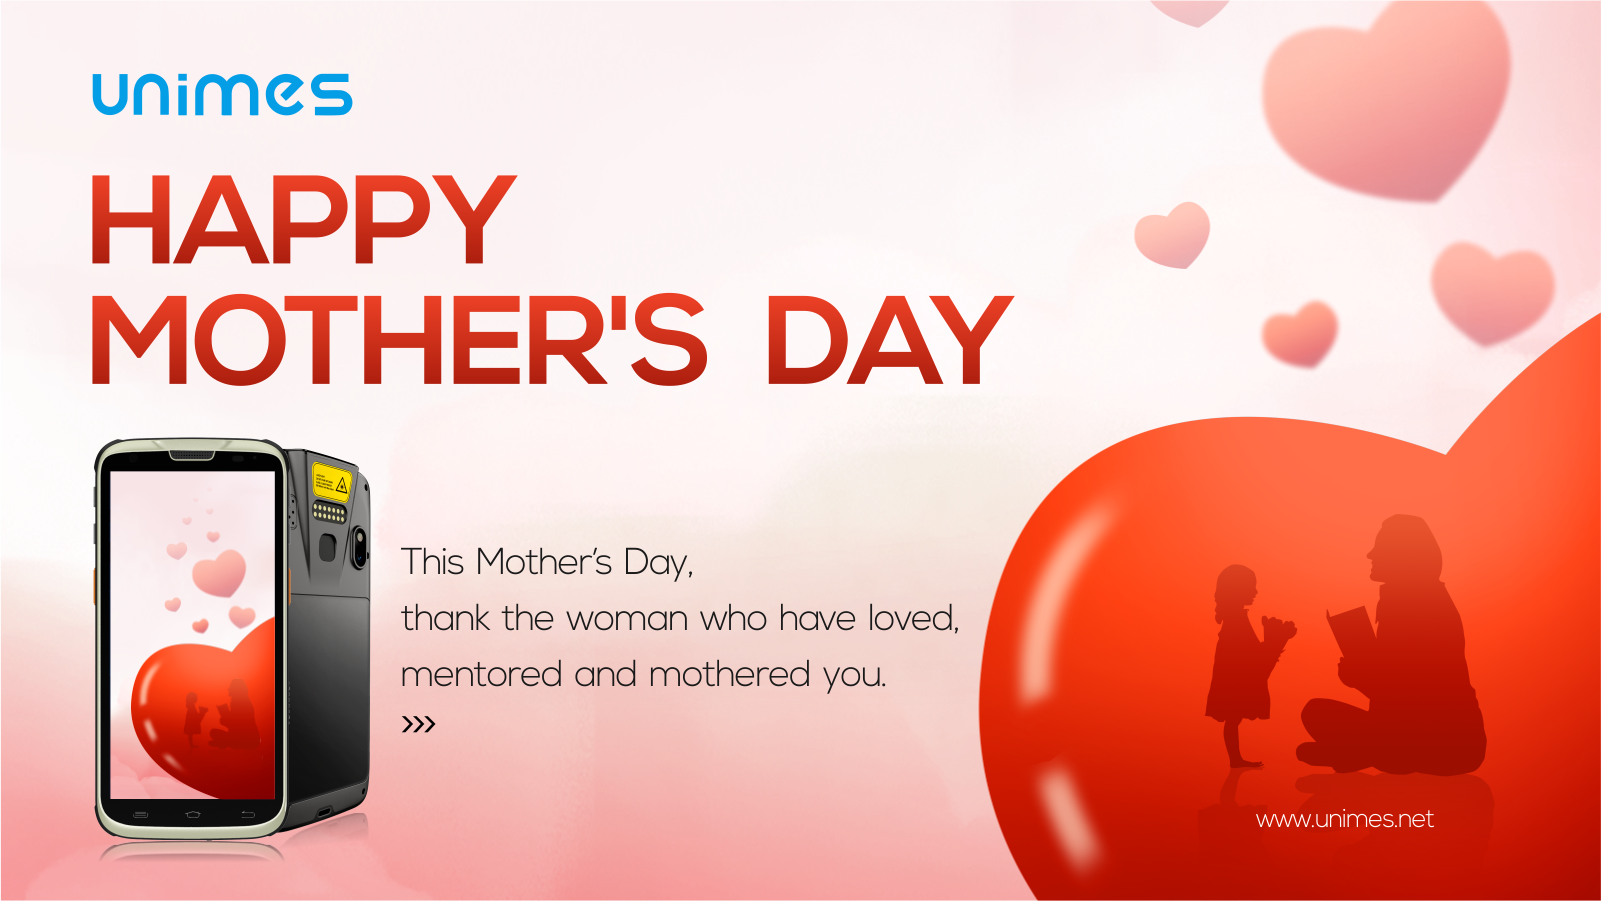 Happy Mother's Day from Unimes